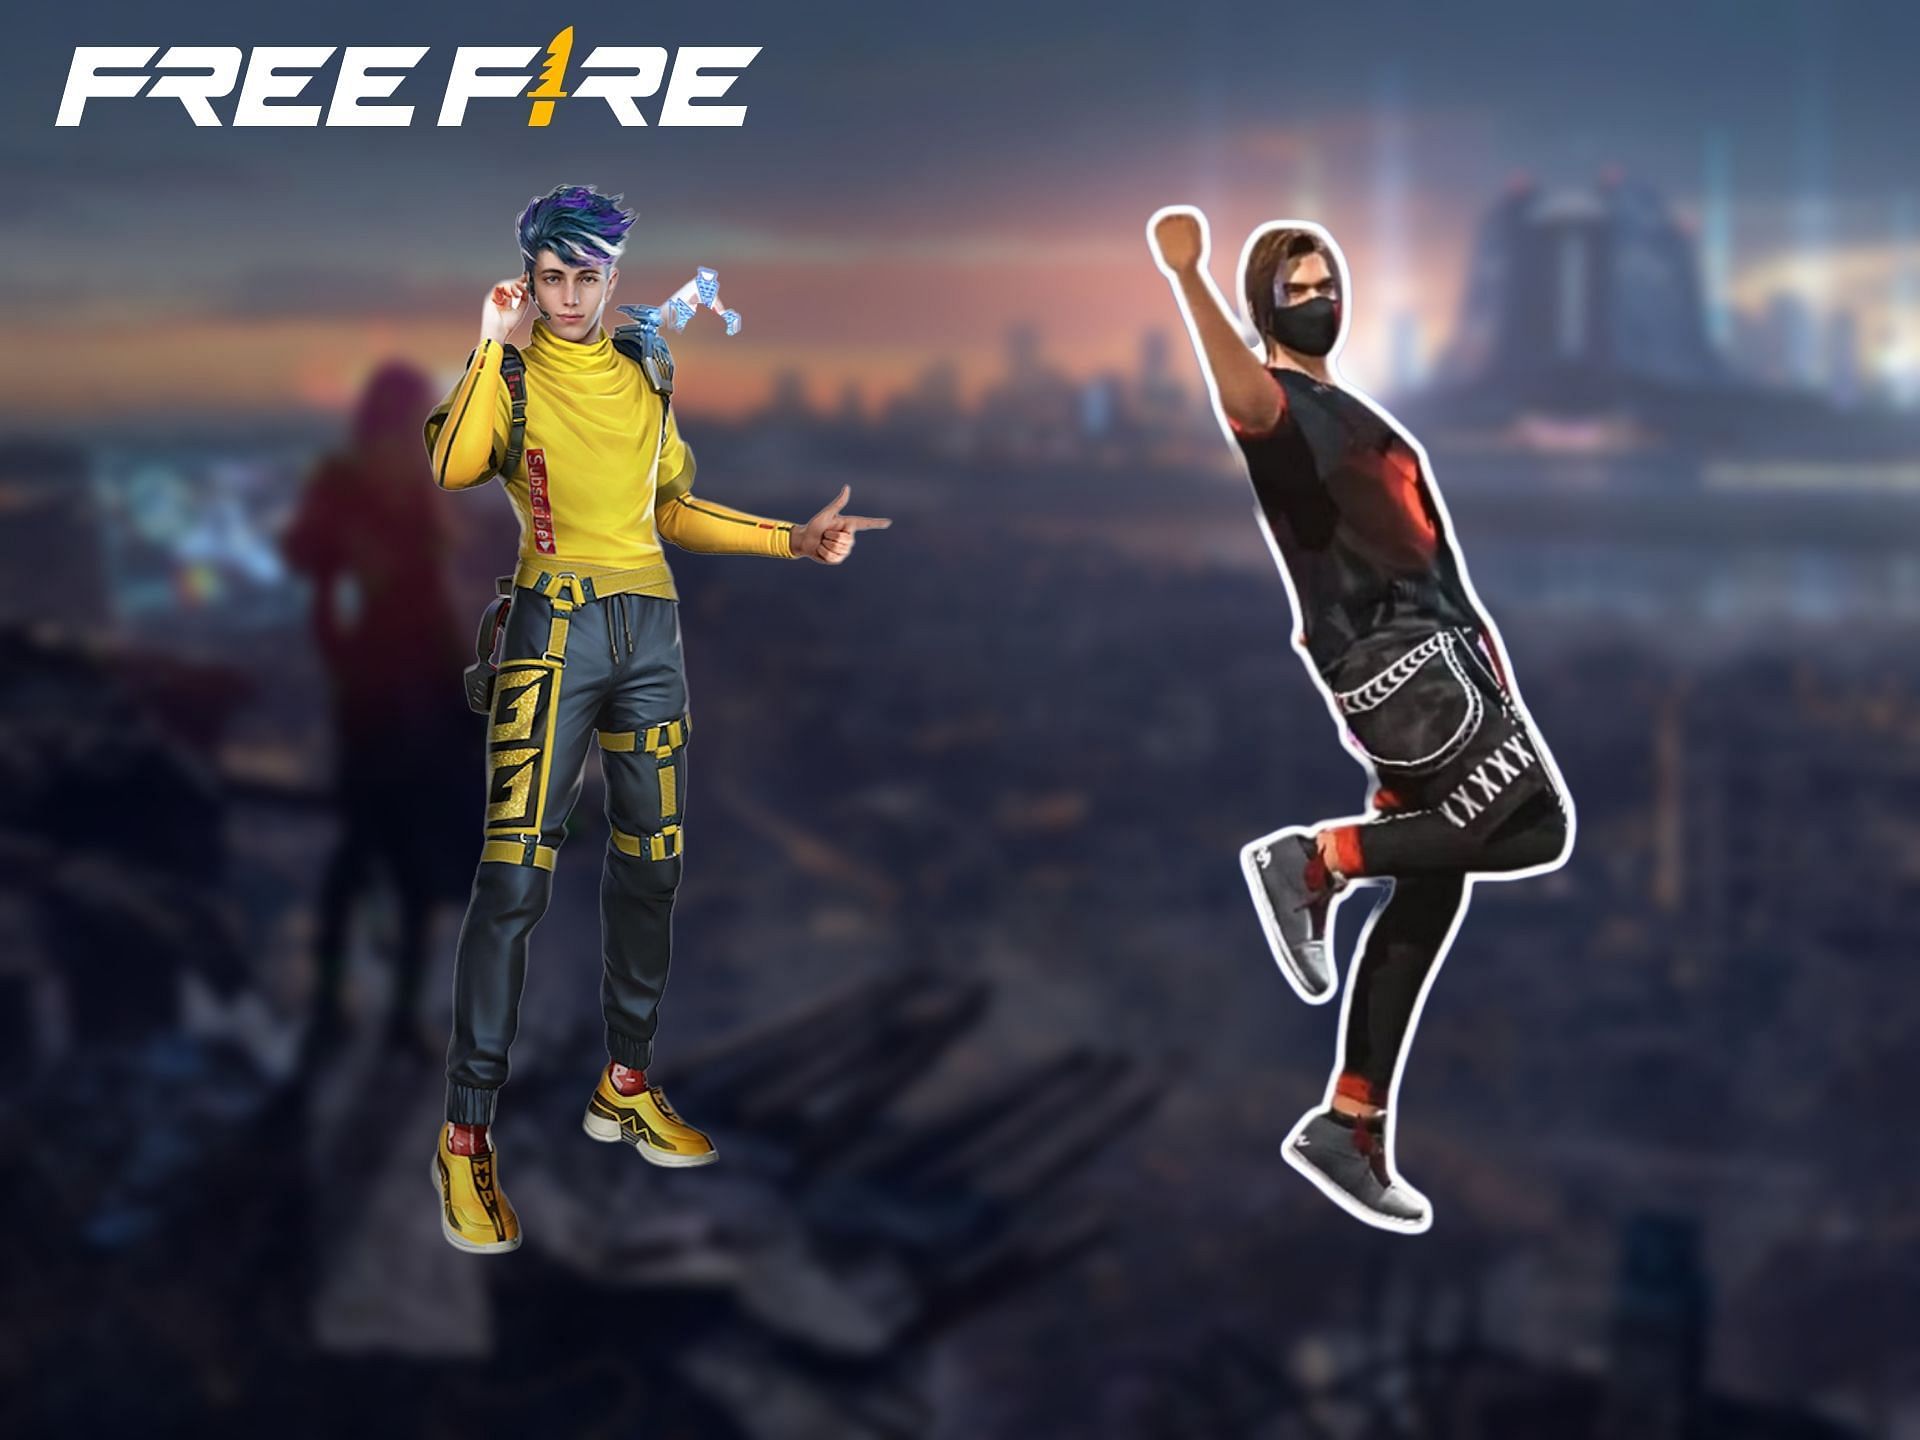 Free Fire redeem codes are an excellent method which offers free rewards (Image via Sportskeeda)